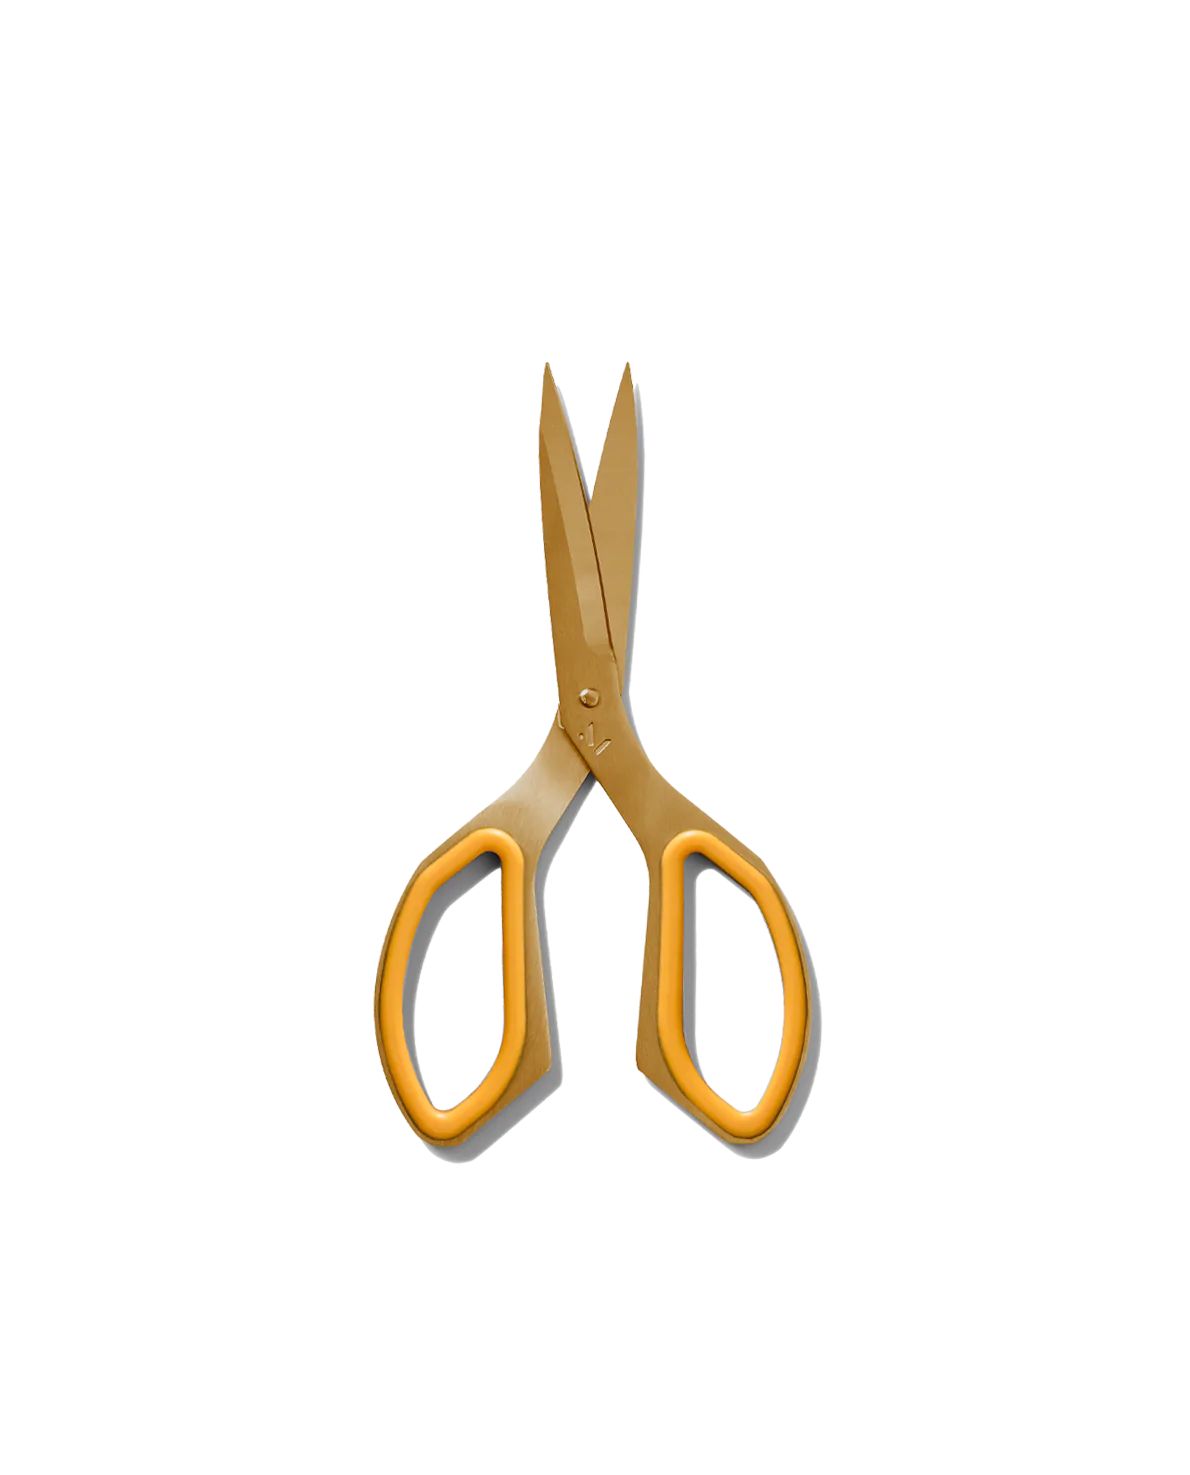 The Good Shears | Material